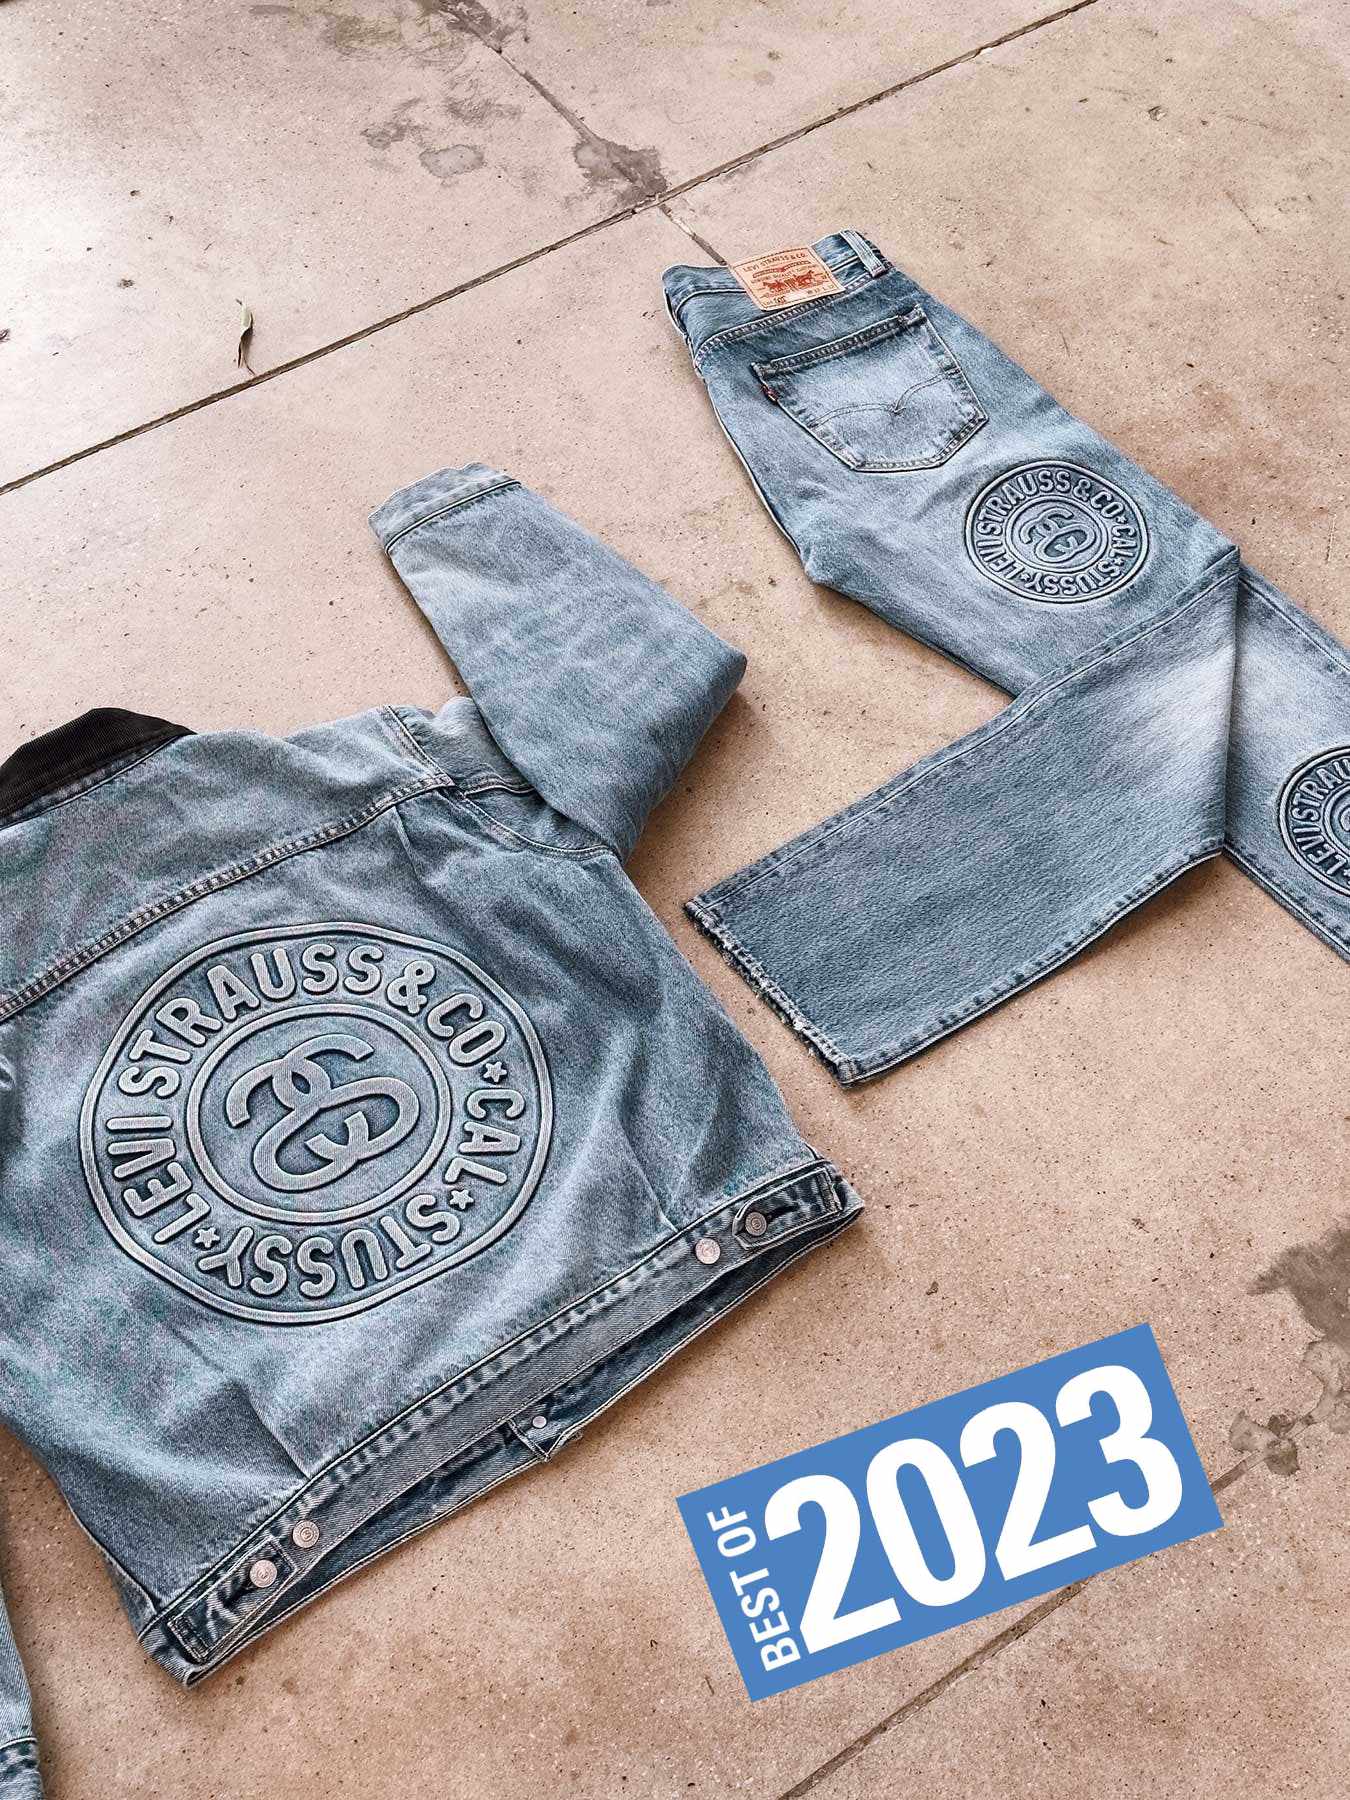 A Stussy x Levi's denim jacket & 501 jeans in light blue wash laying on the ground